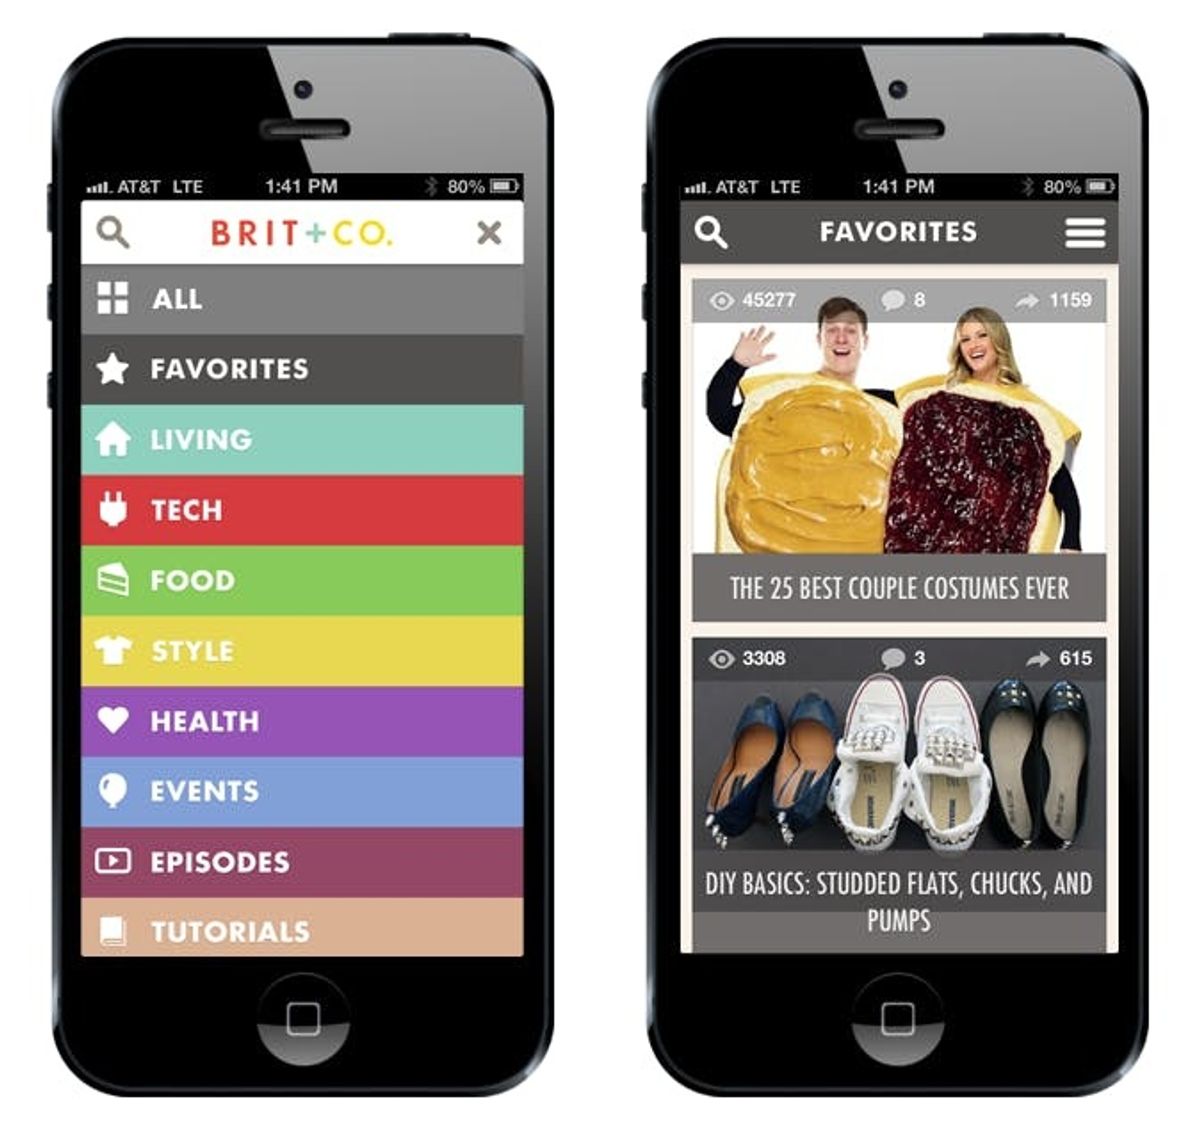 By Popular Demand… Star Your Favorite Posts on Brit + Co!